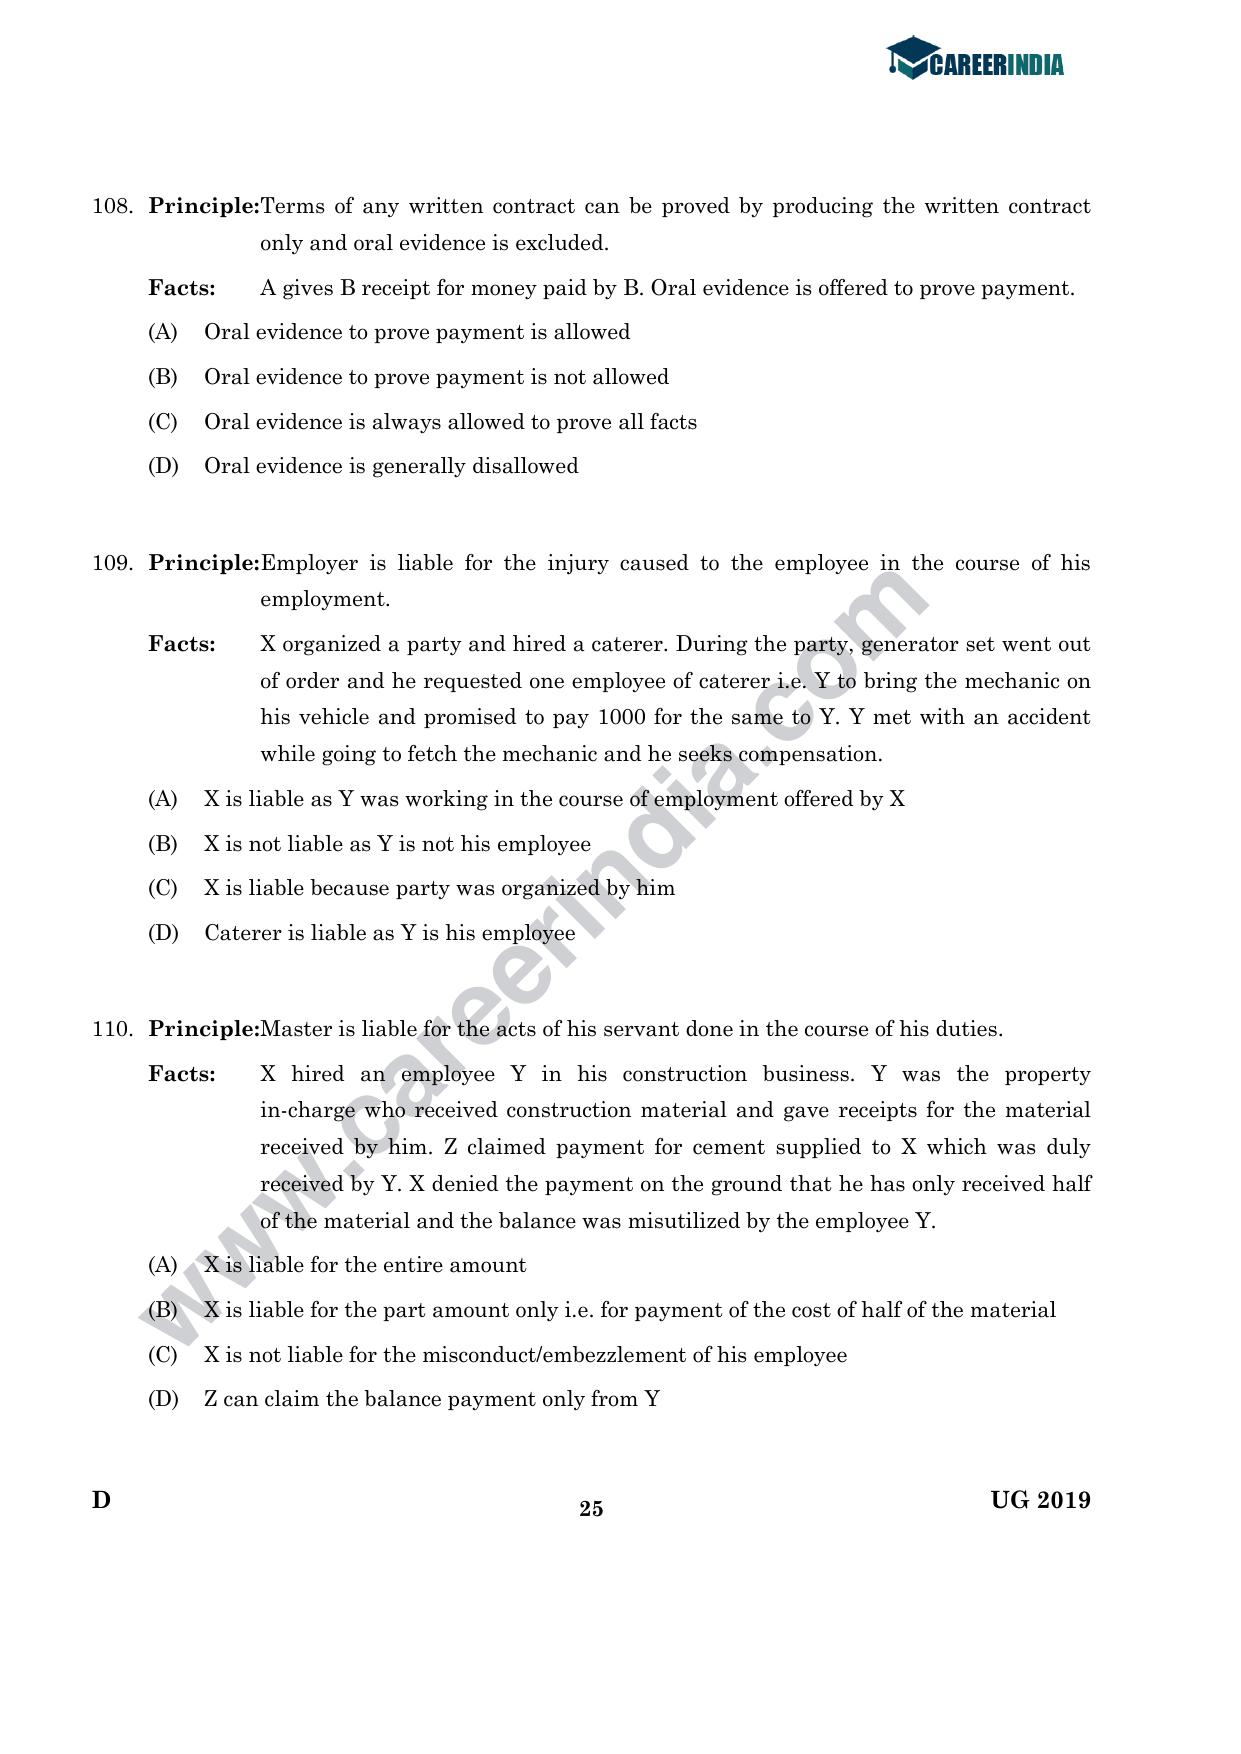 CLAT 2019 UG Logical-Reasoning Question Paper - Page 24